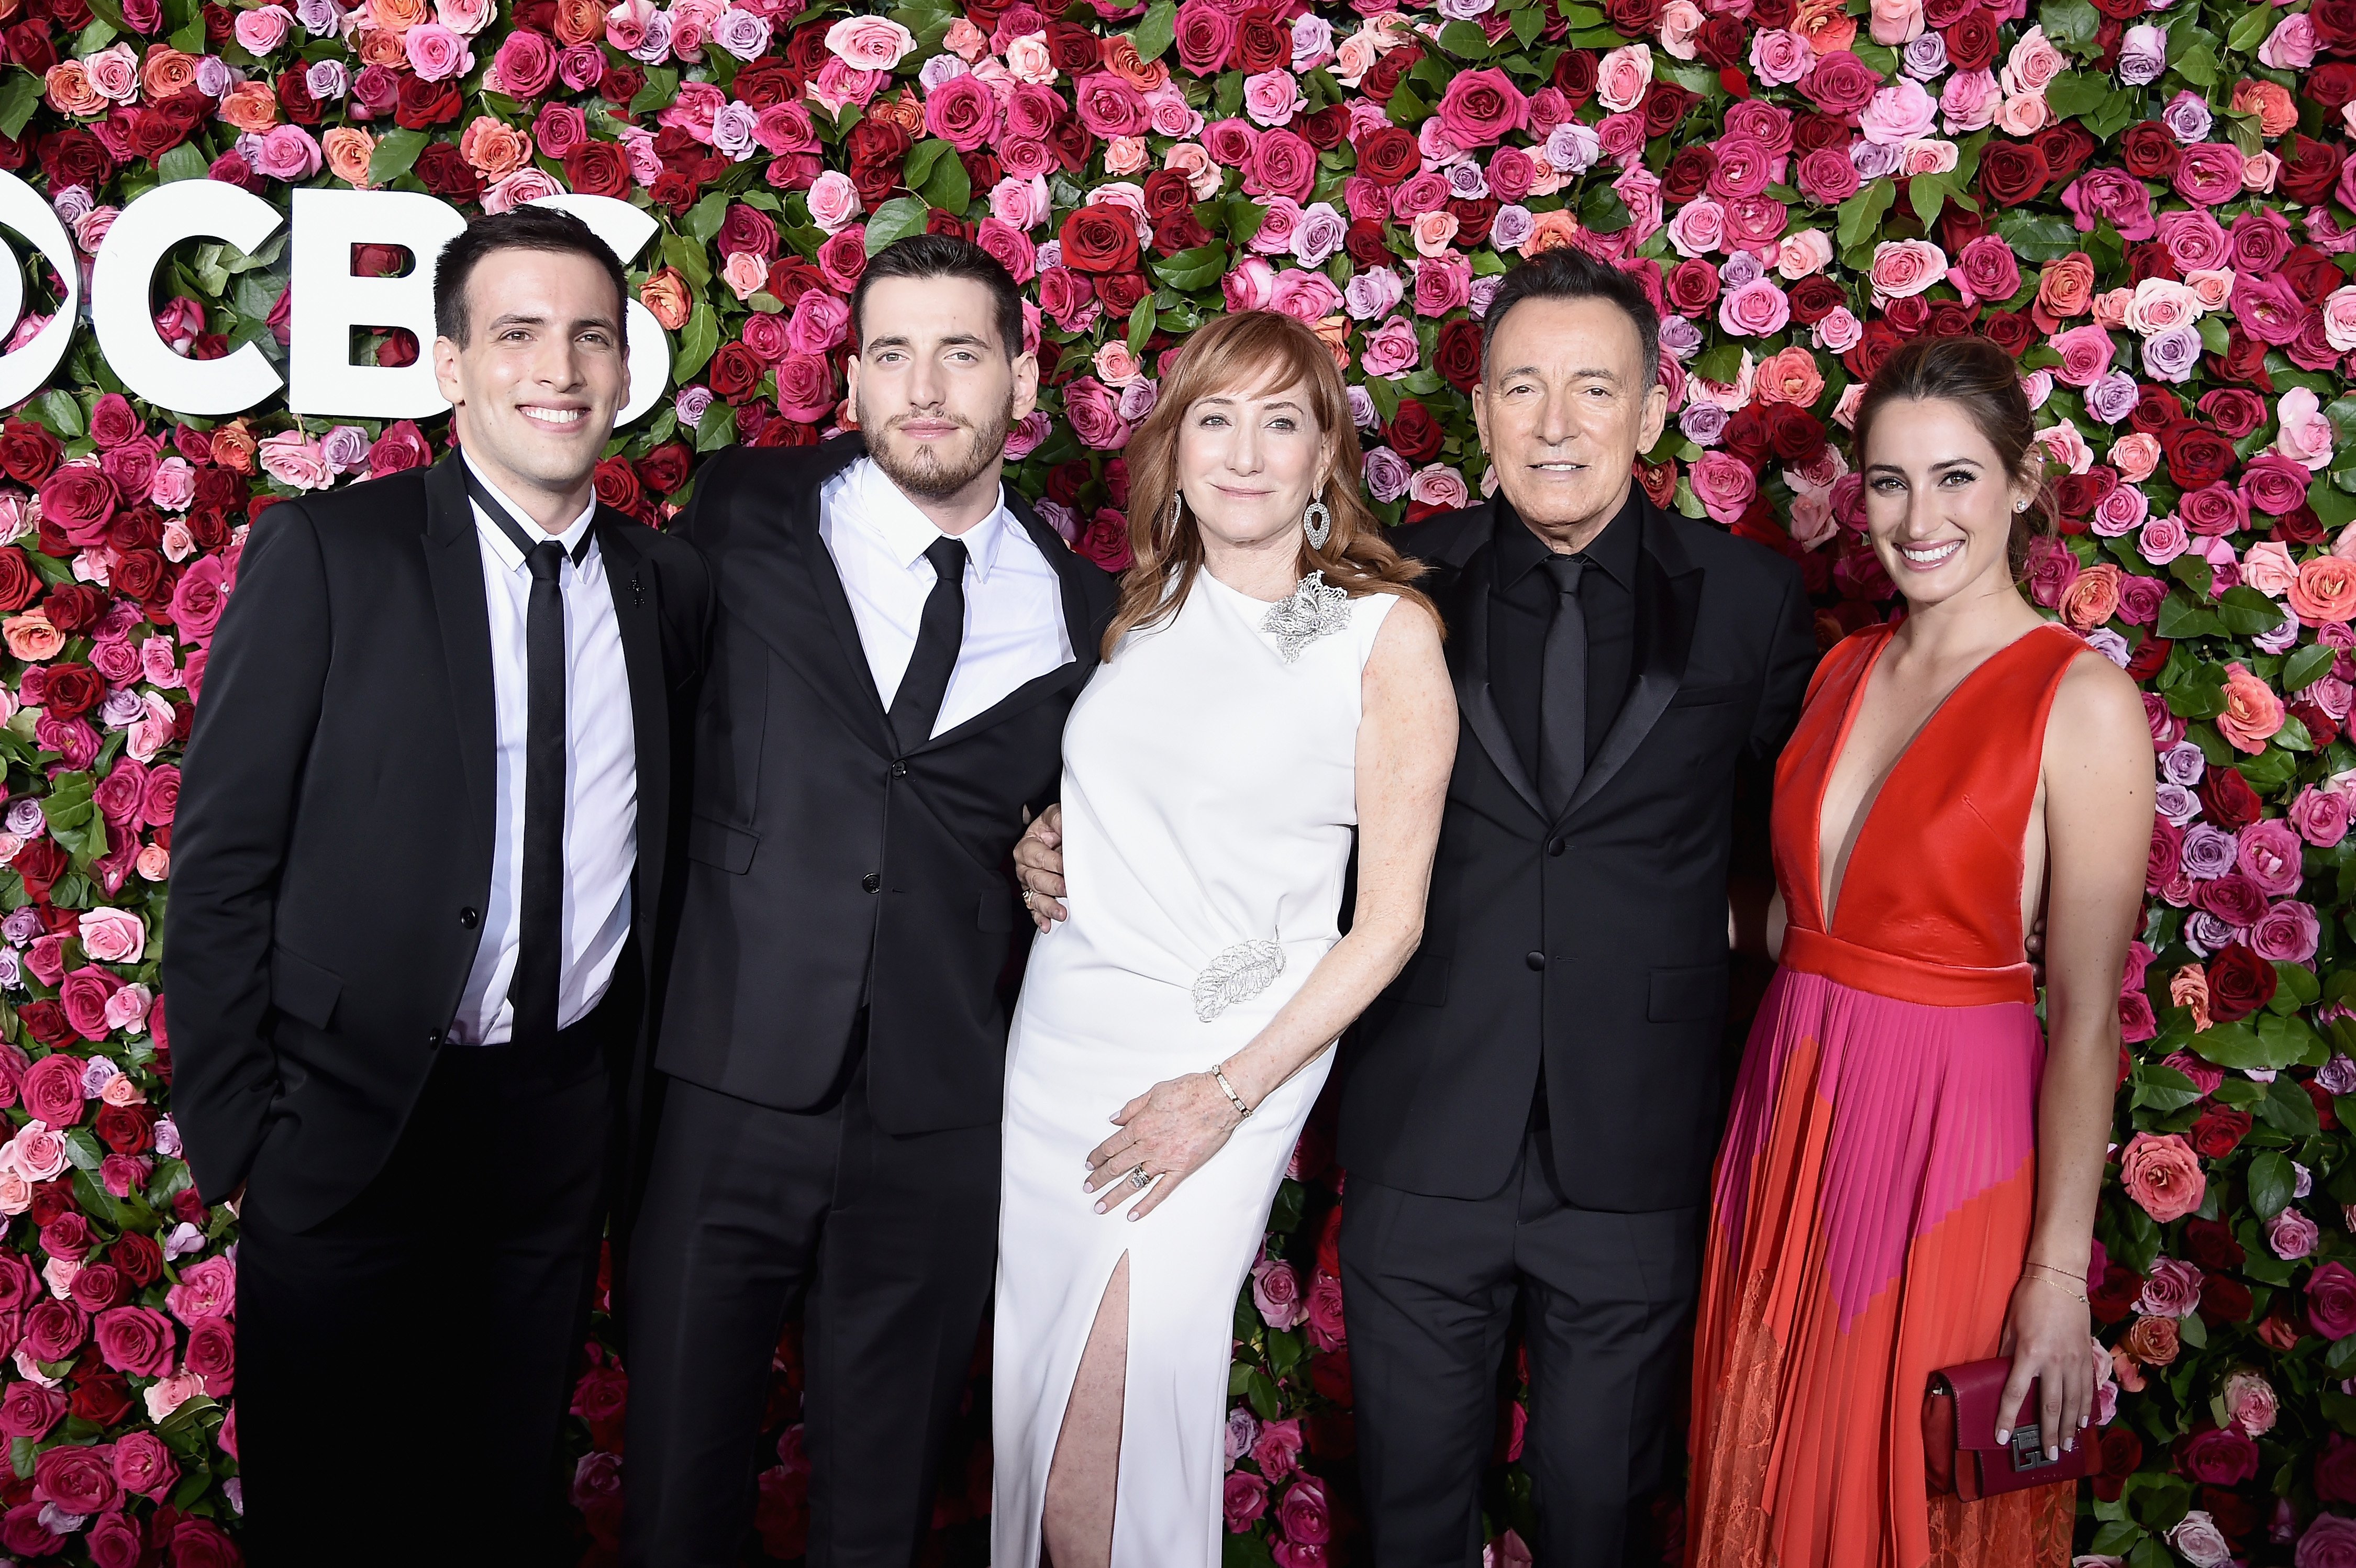 Sam Springsteen, Evan Springsteen, Patti Scialfa, Bruce Springsteen, and Jessica Rae Springsteen at the 72nd Annual Tony Awards on June 10, 2018 in New York City. | Source: Getty Images